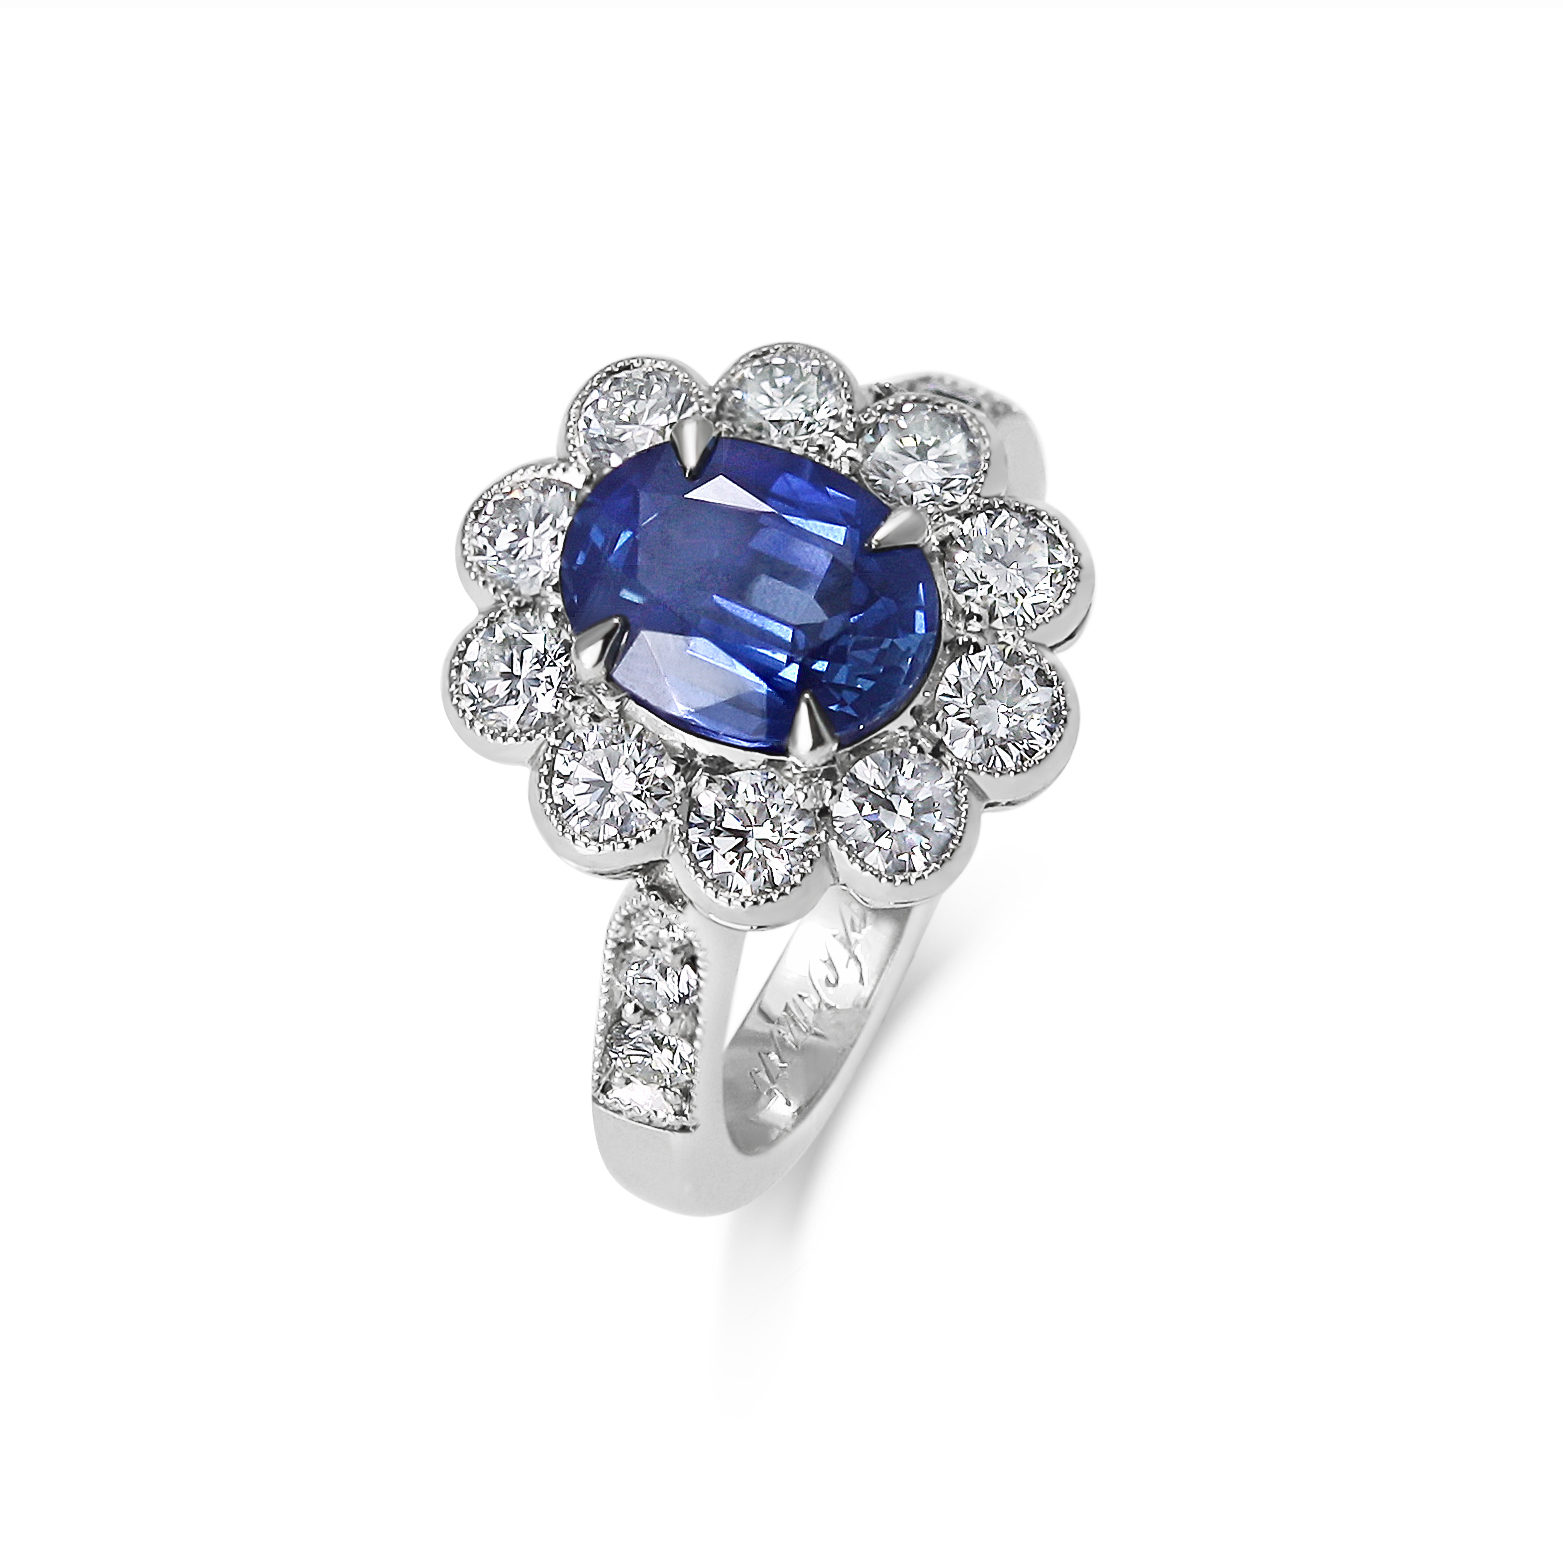 Bespoke Archive ~ Michelle's Ring